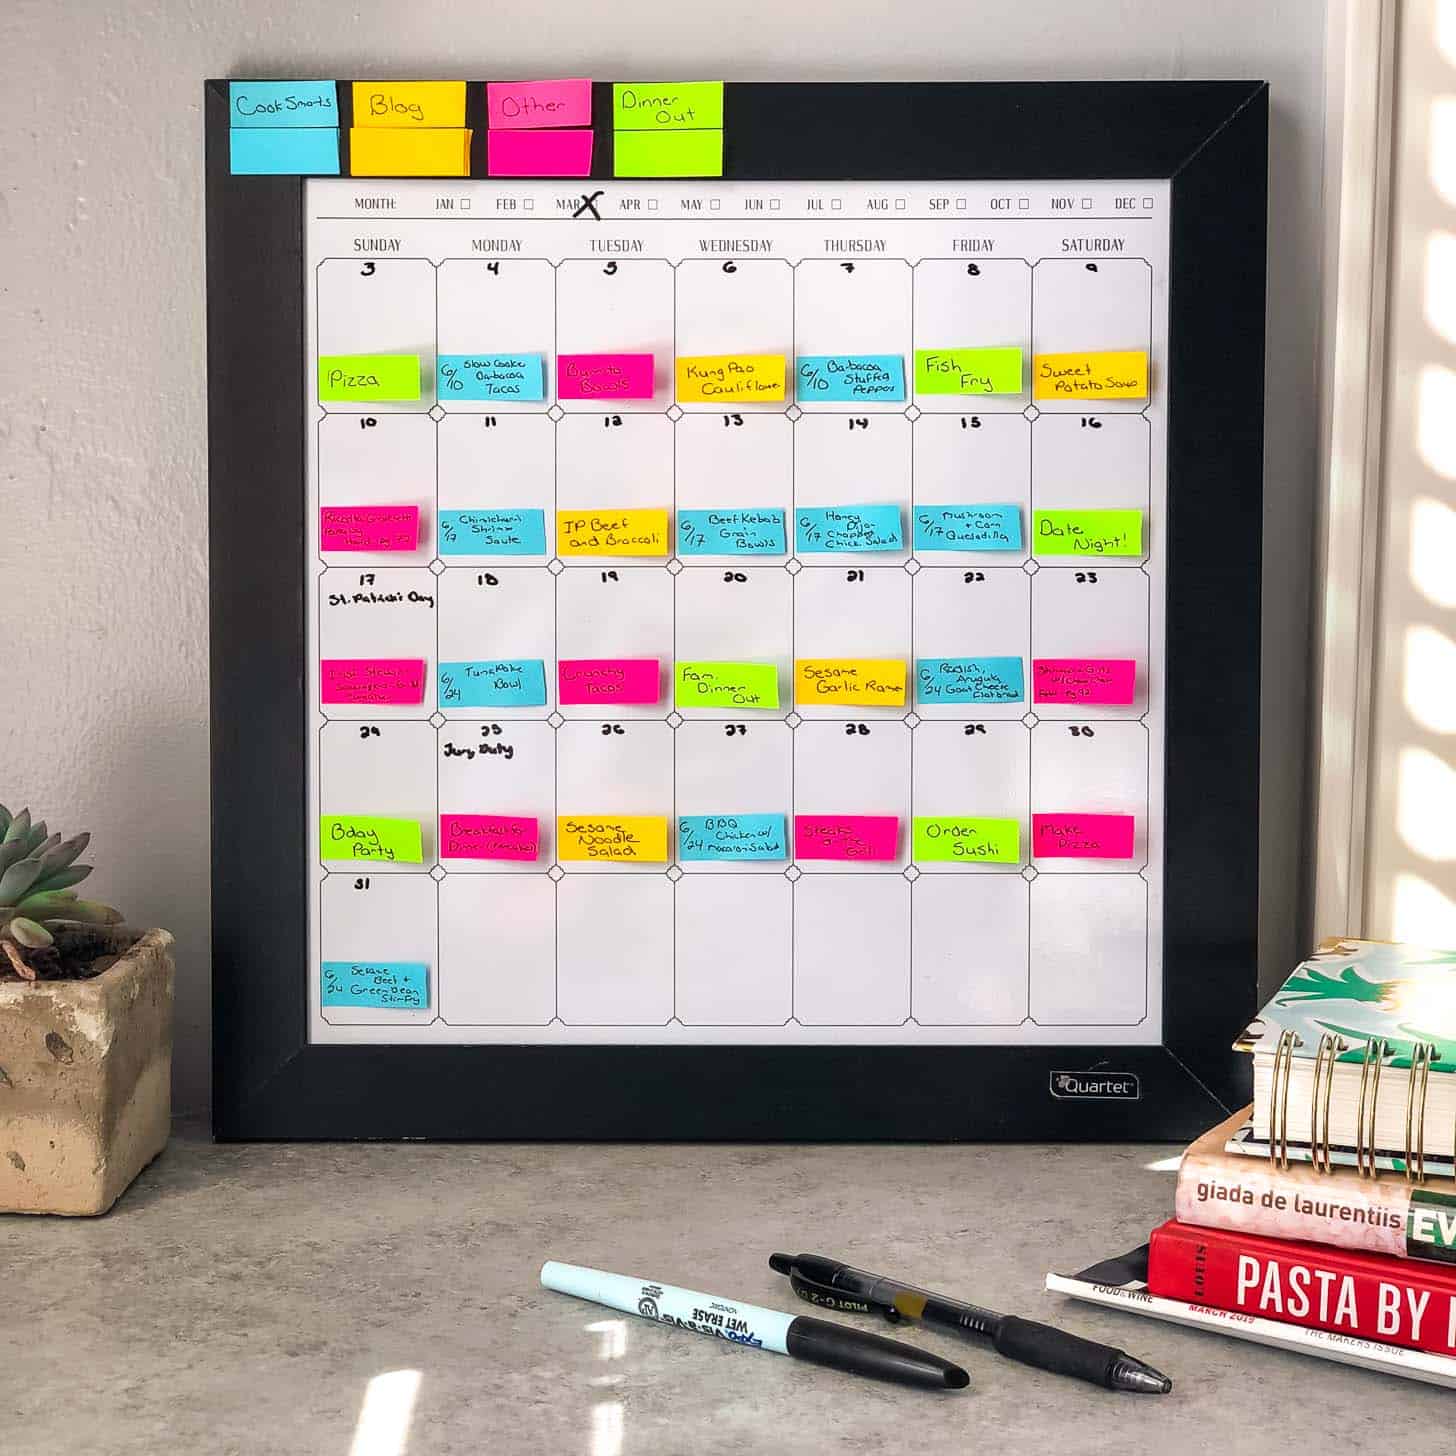 meal planning on a dry erase calender